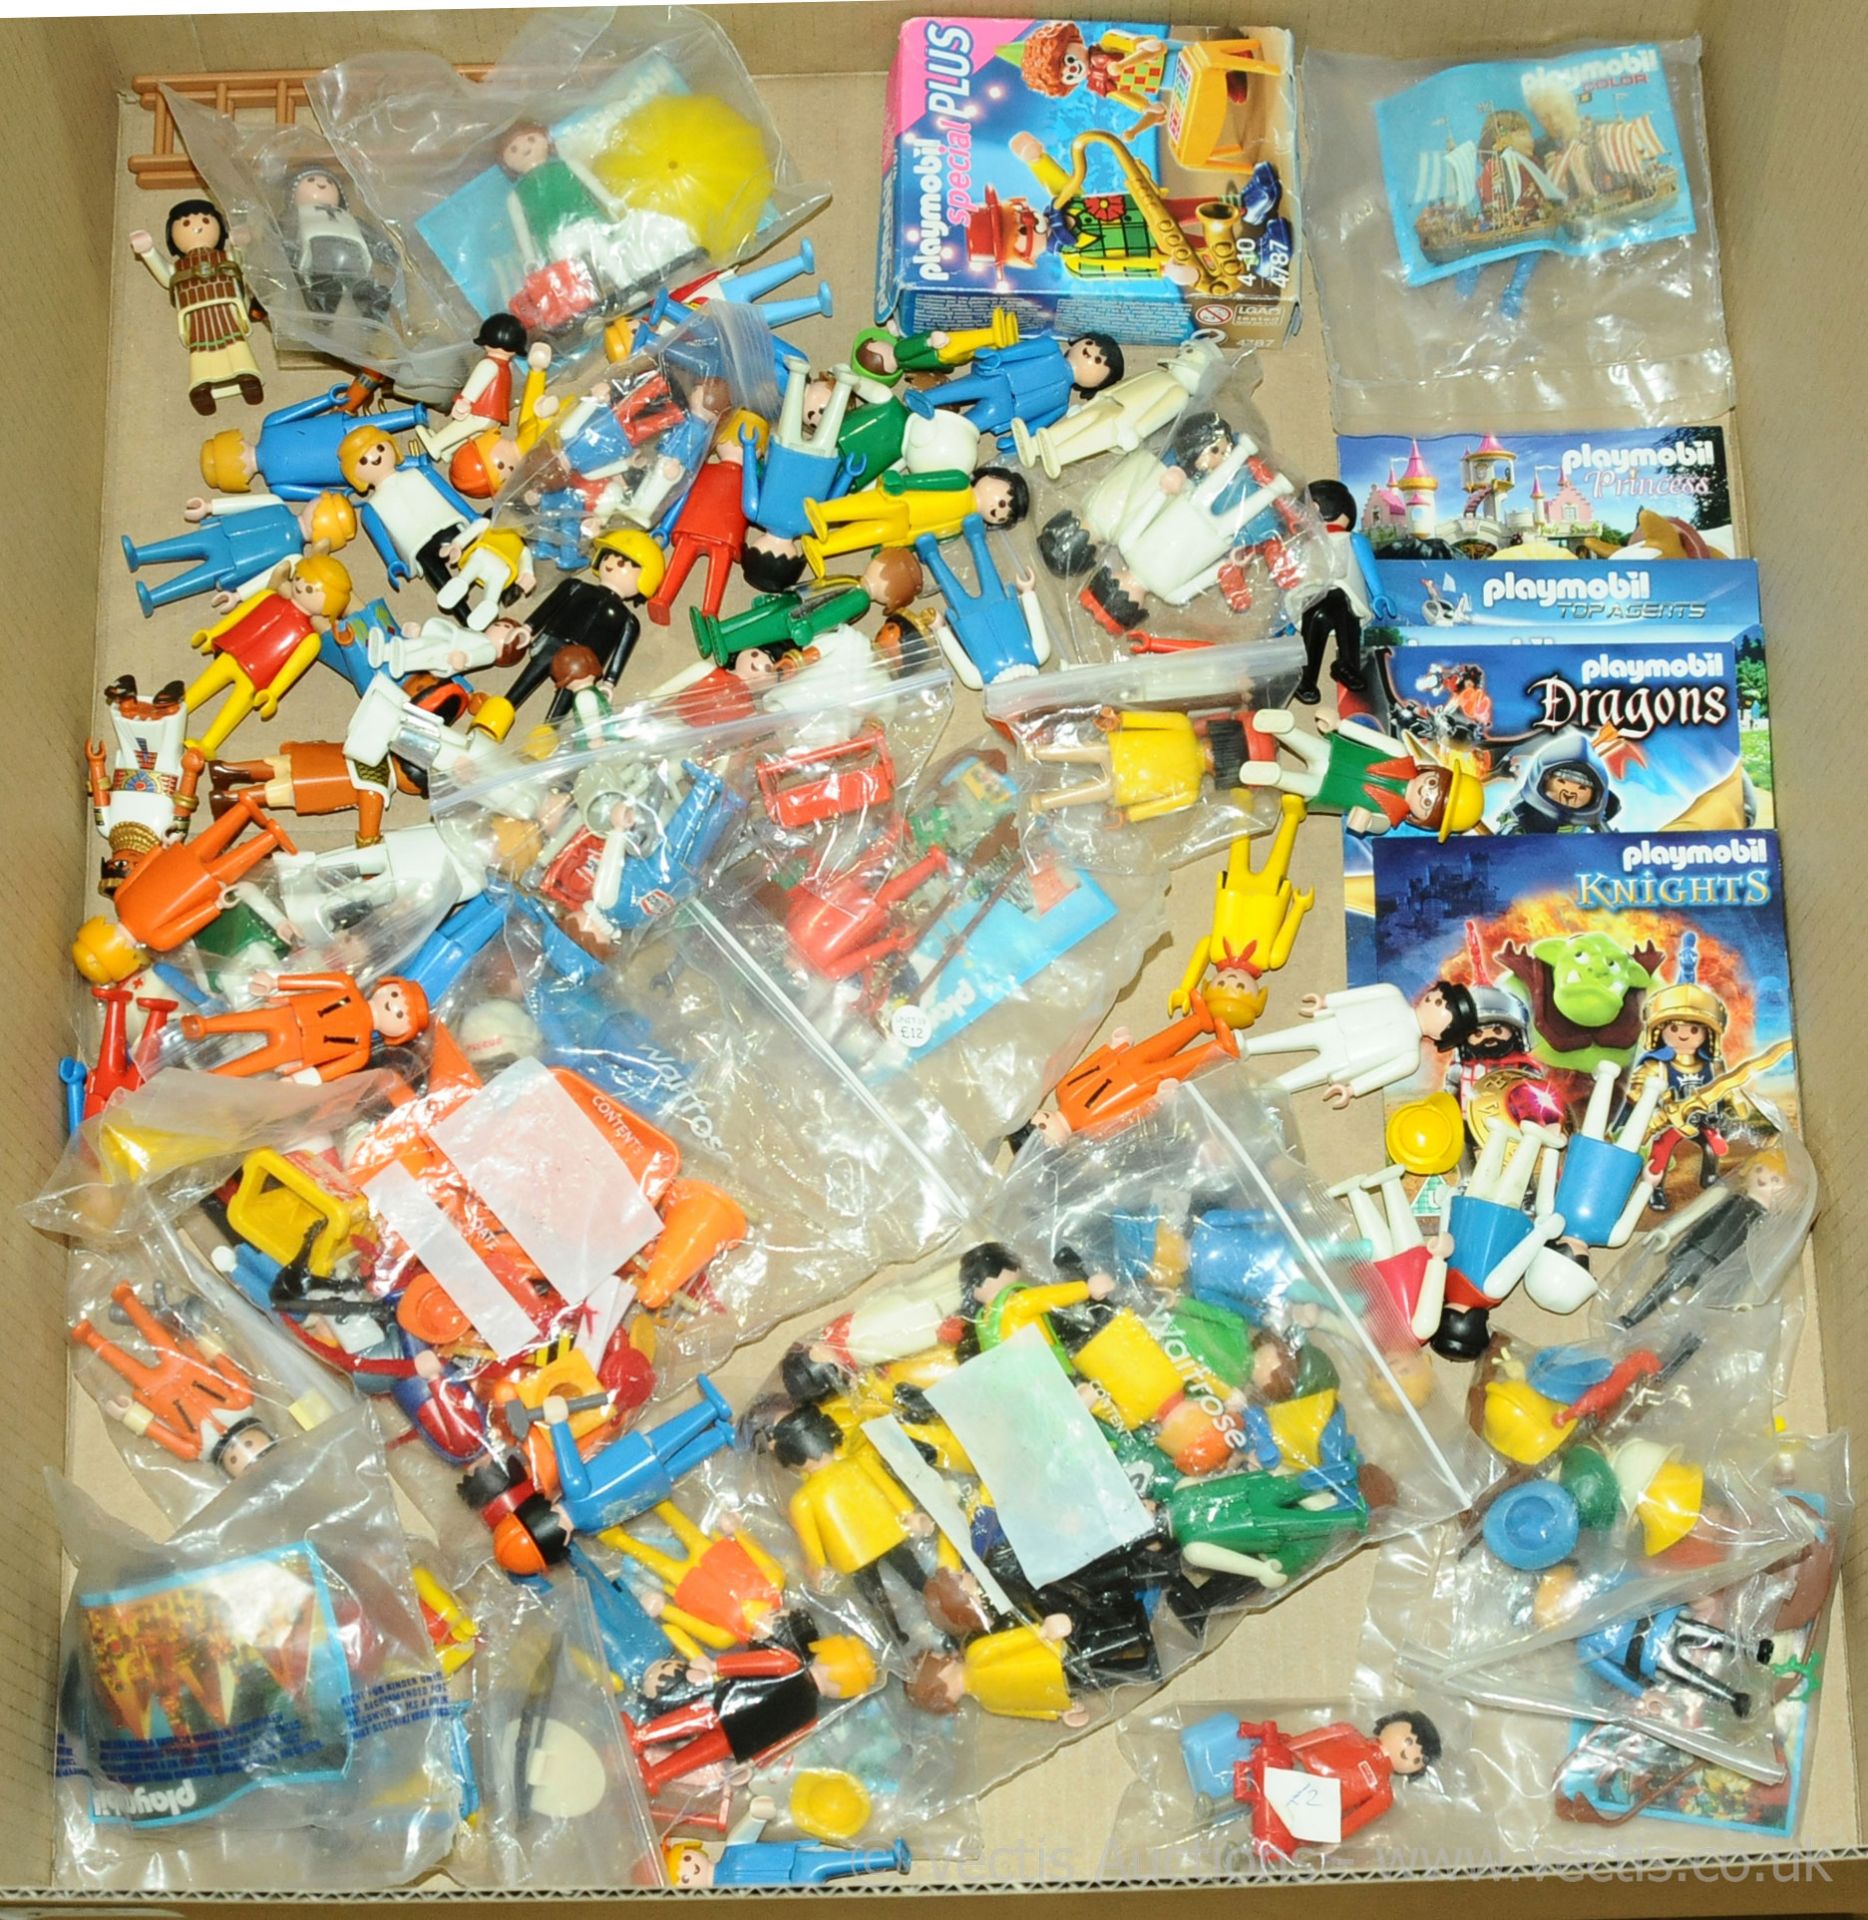 Playmobil unboxed figures and accessories, DVDs